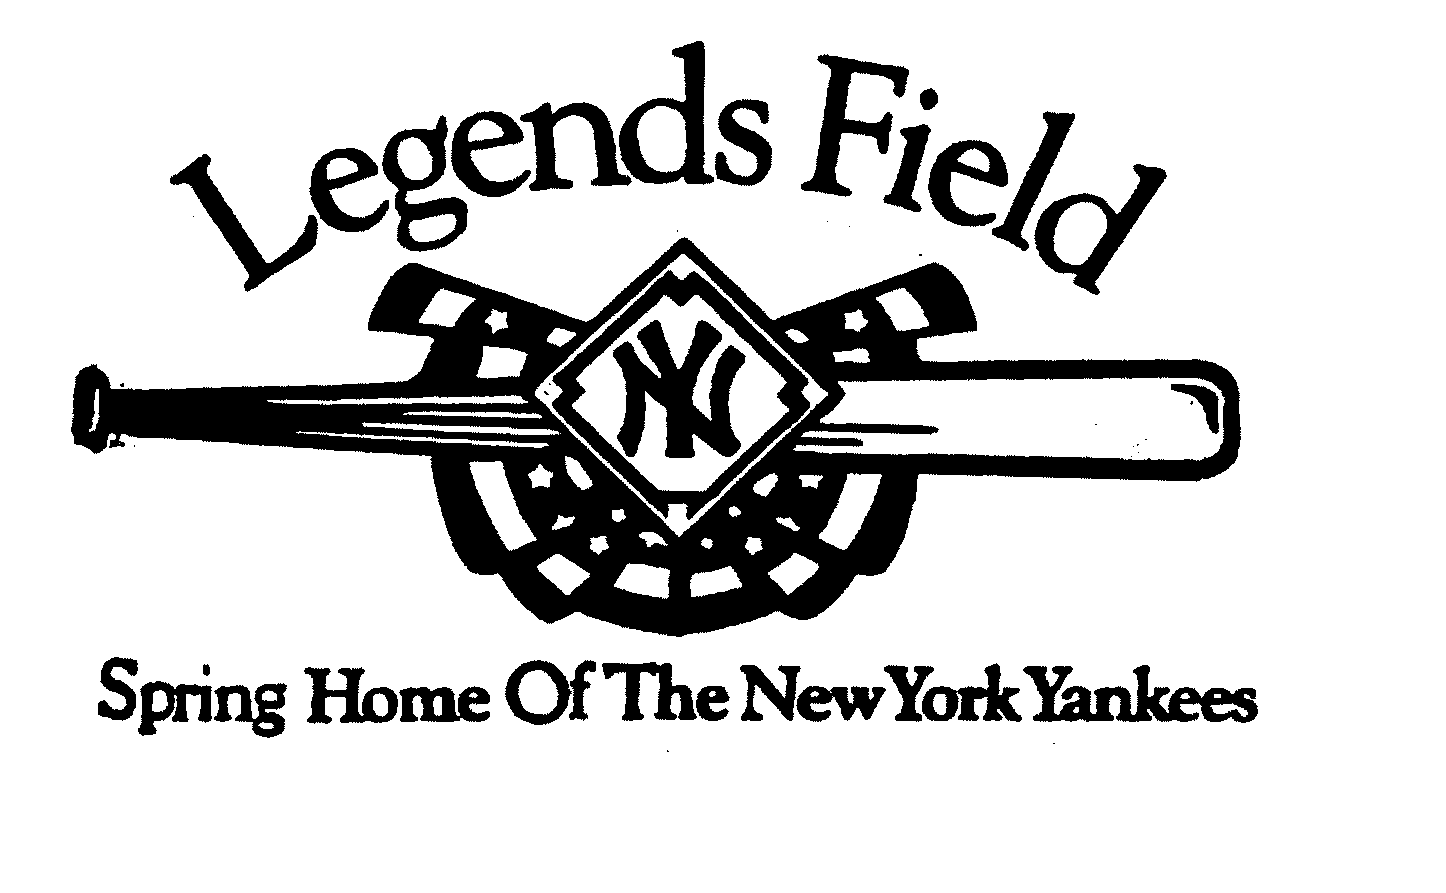  LEGENDS FIELD SPRING HOME OF THE NEW YORK YANKEES NY